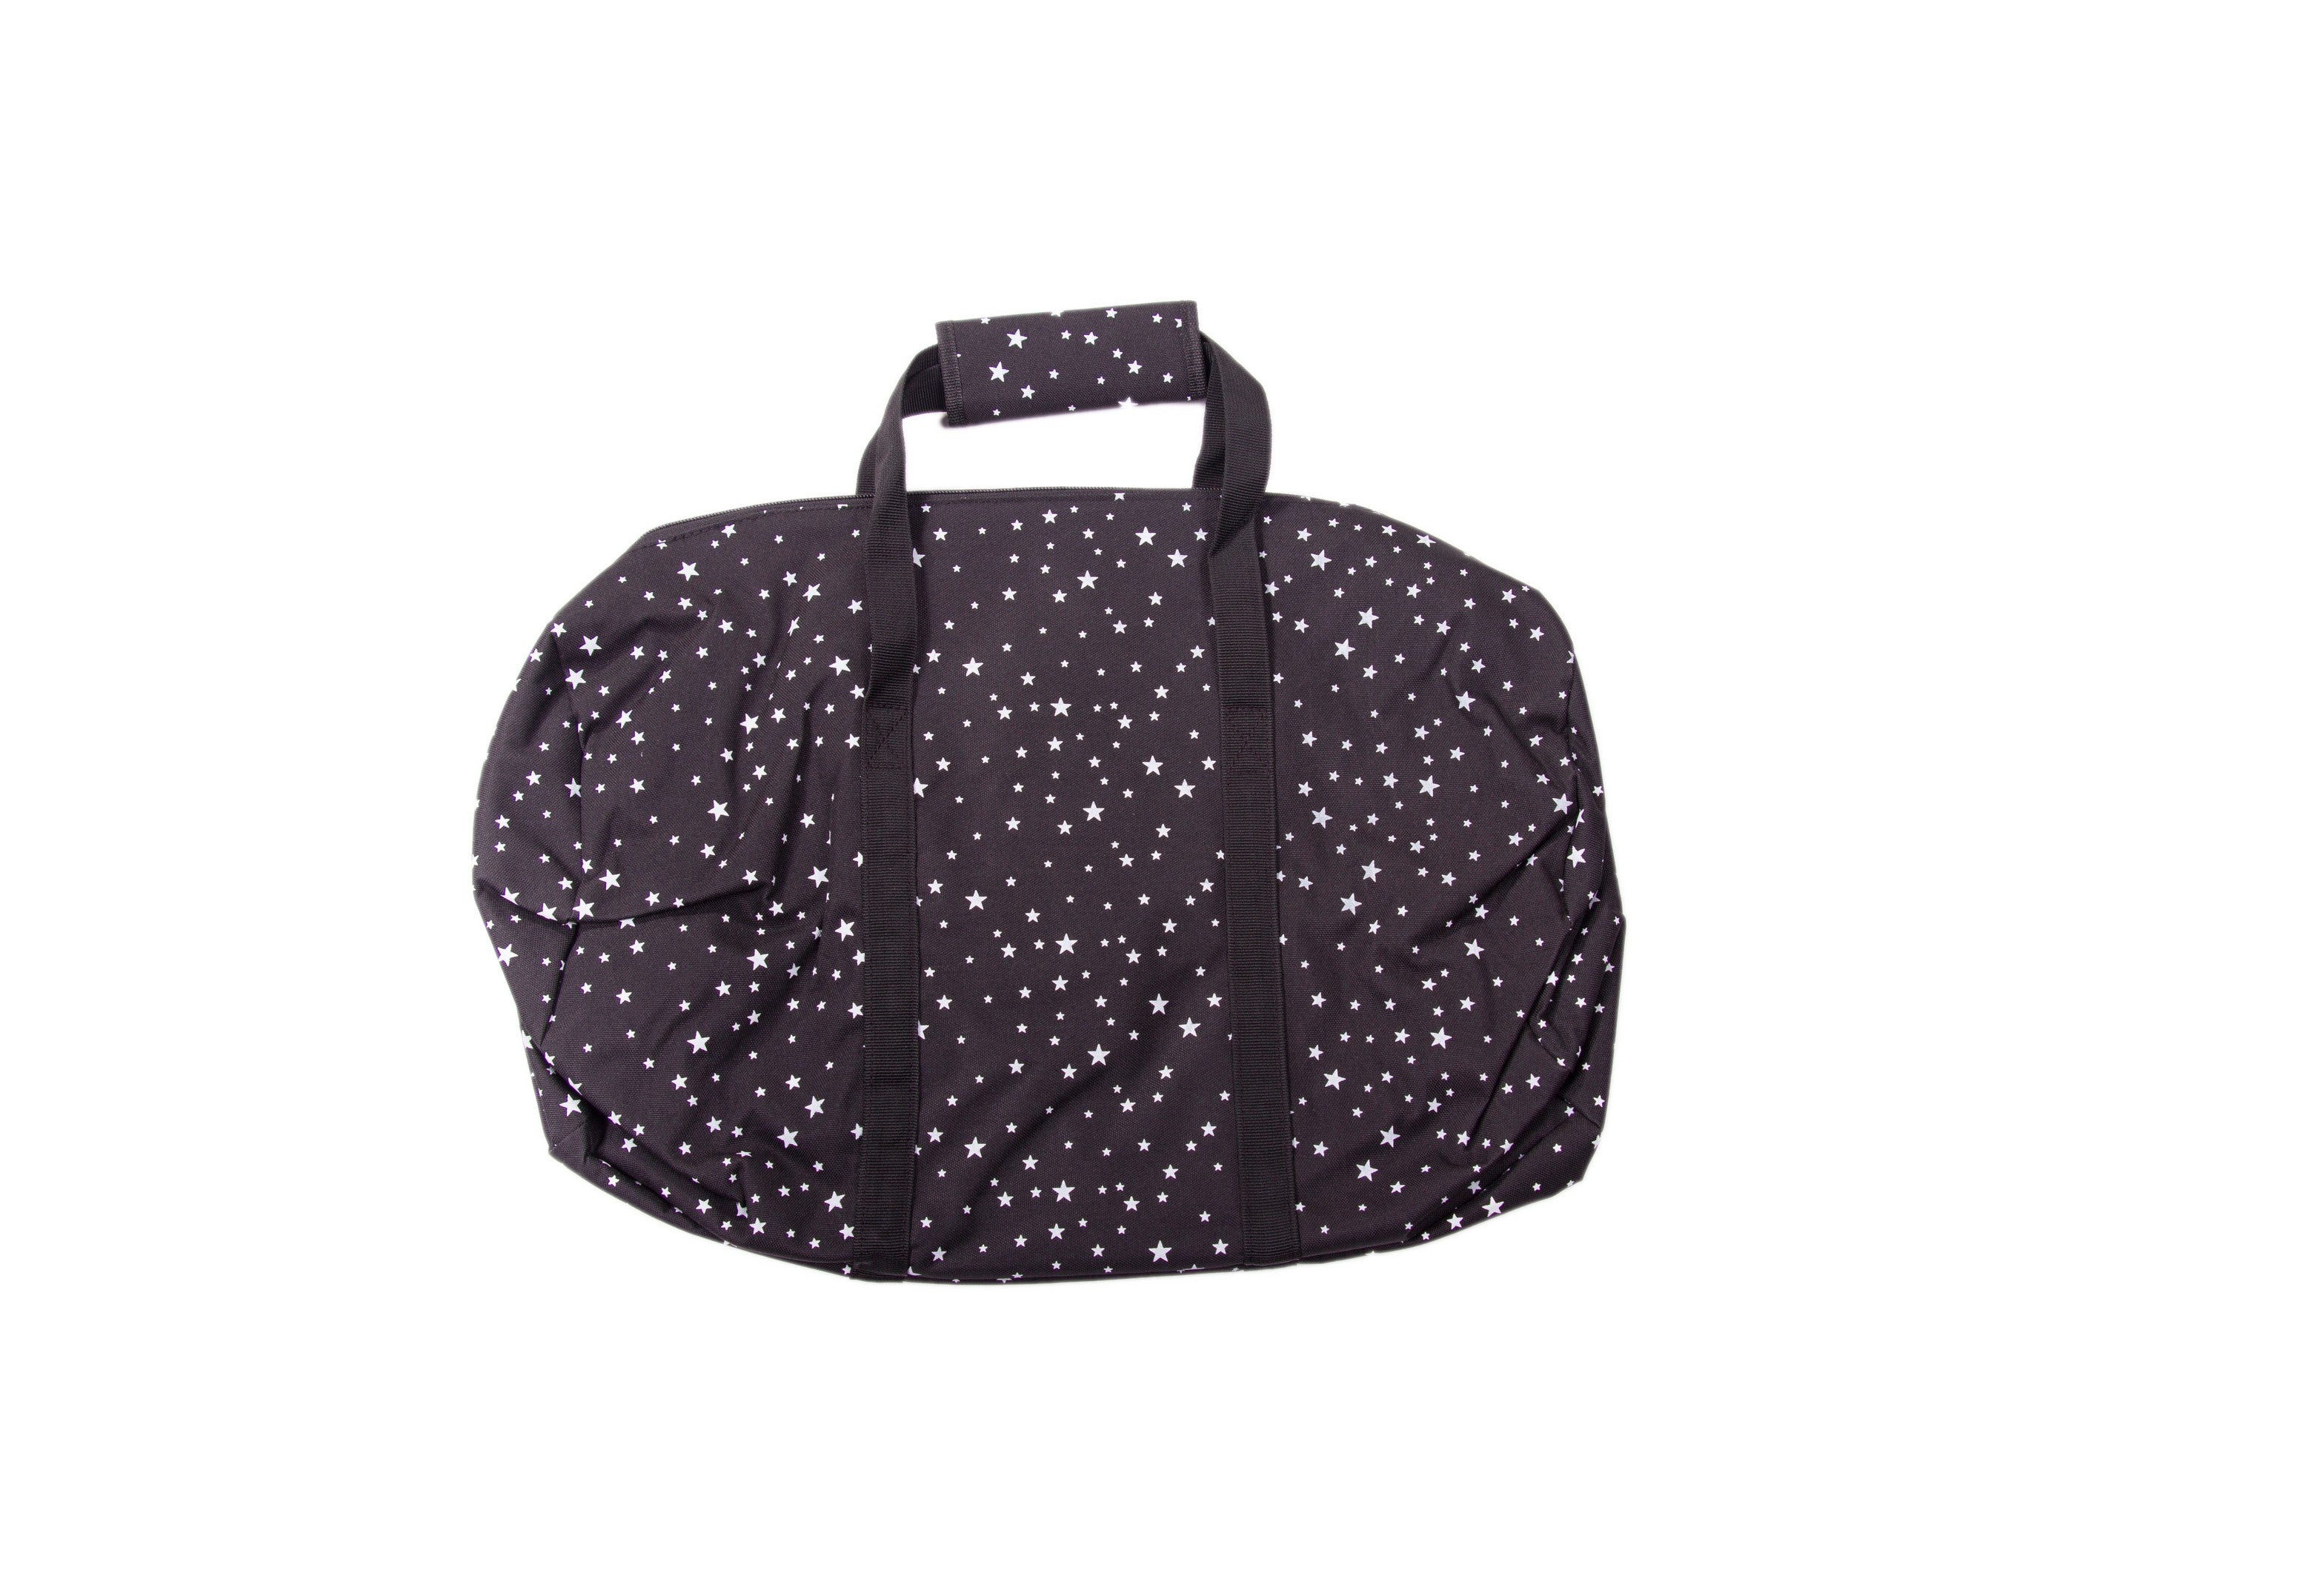 Merse & Company Starry System Duffel Bag